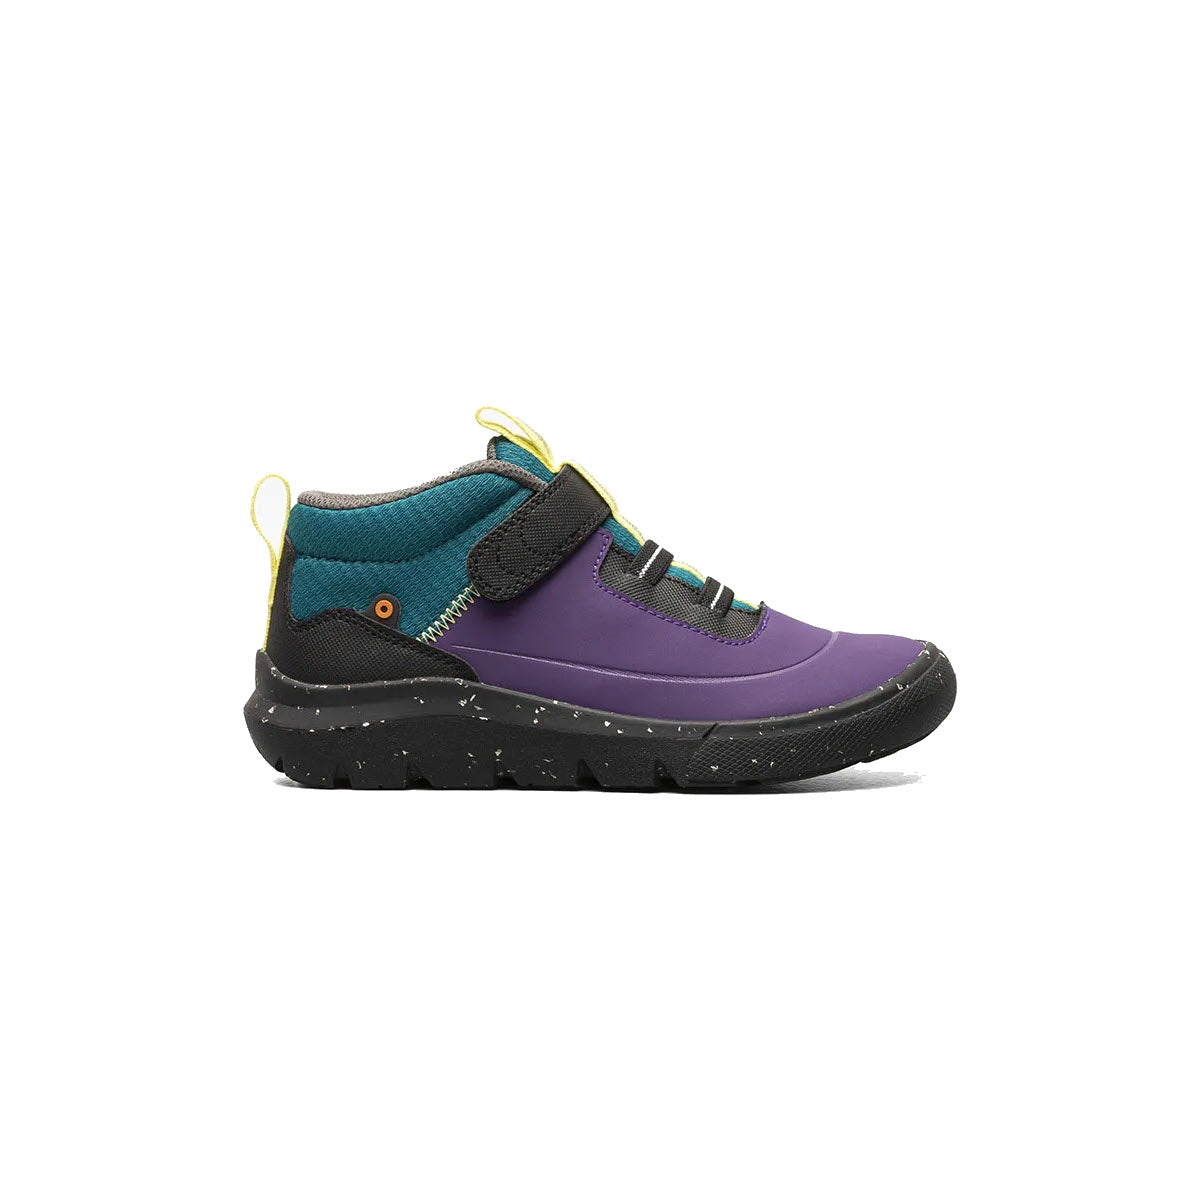 A colorful children&#39;s shoe featuring a purple upper, teal ankle padding, and a thick black sole, with a yellow pull tab and a hook and loop closure is the BOGS SKYLINE KICKER MID PURPLE MULTI-K by Bogs.